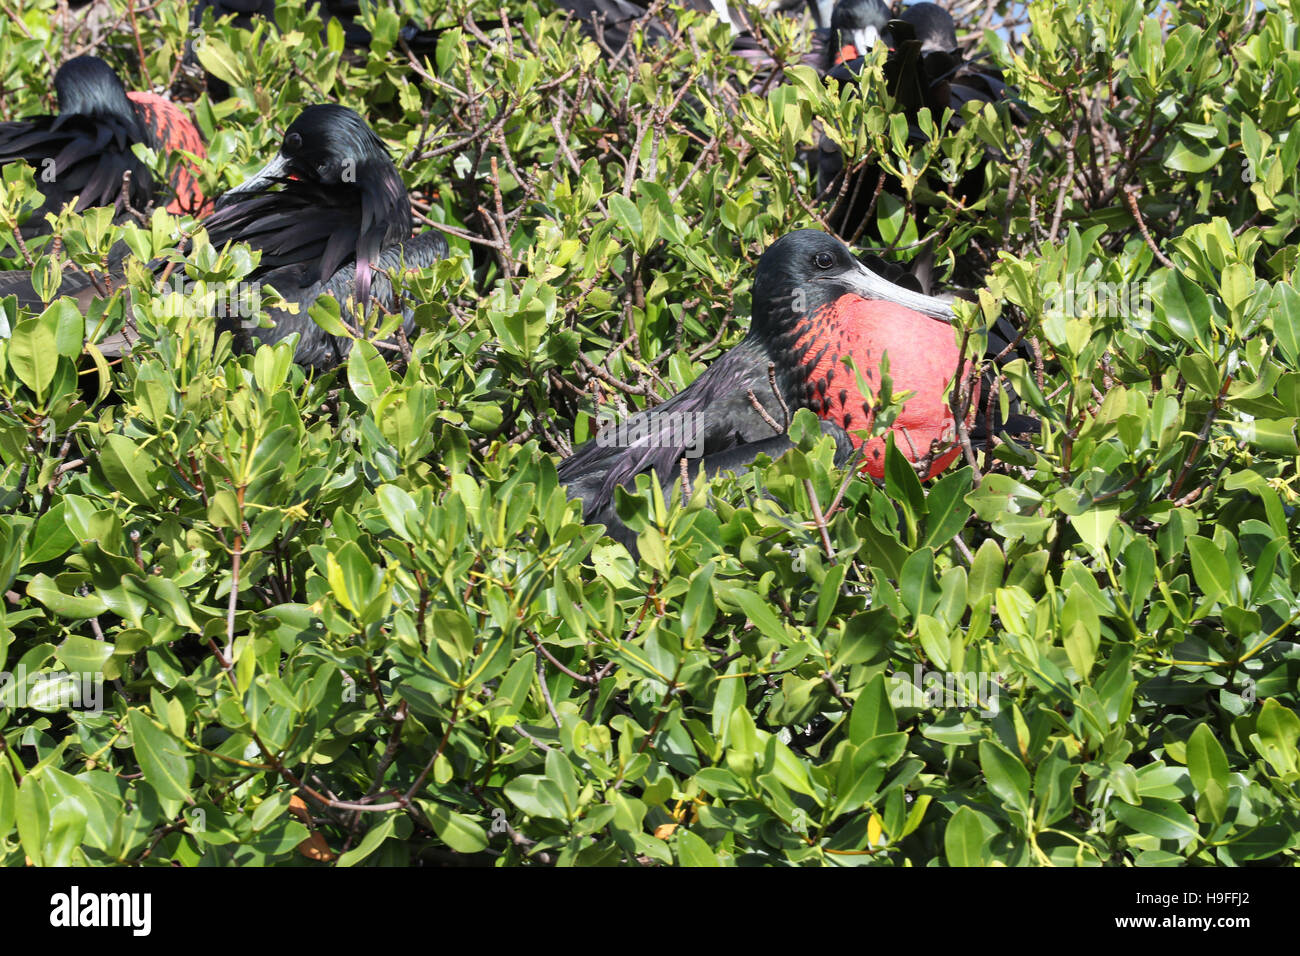 Frigate birds seen by Prince Harry as he takes a boat tour through mangroves on the island of Barbuda to see one of the largest colonies of birds in the world, as he continues his tour of the Caribbean. Stock Photo